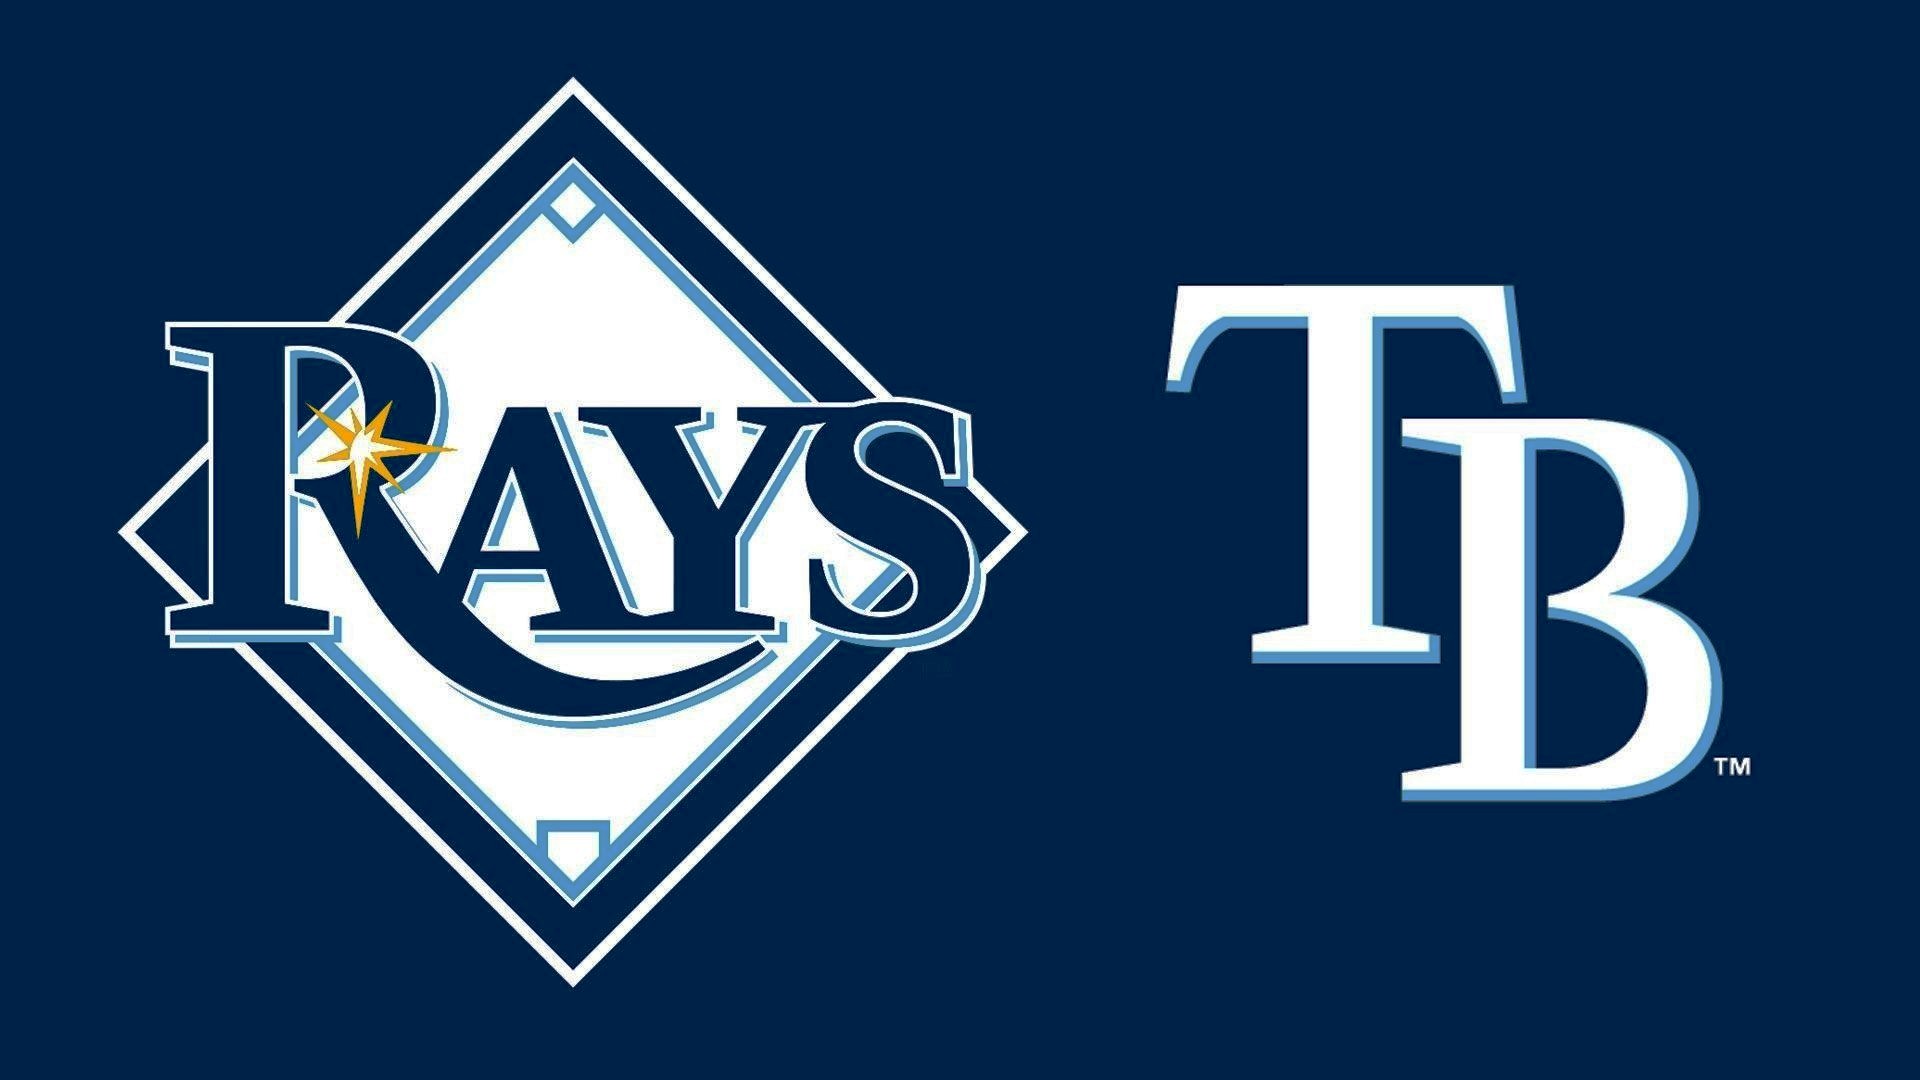 Tampa Bay Rays Logo Wallpaper in HD with high-resolution 1920x1080 pixel. You can use this wallpaper for Mac Desktop Wallpaper, Laptop Screensavers, Android Wallpapers, Tablet or iPhone Home Screen and another mobile phone device